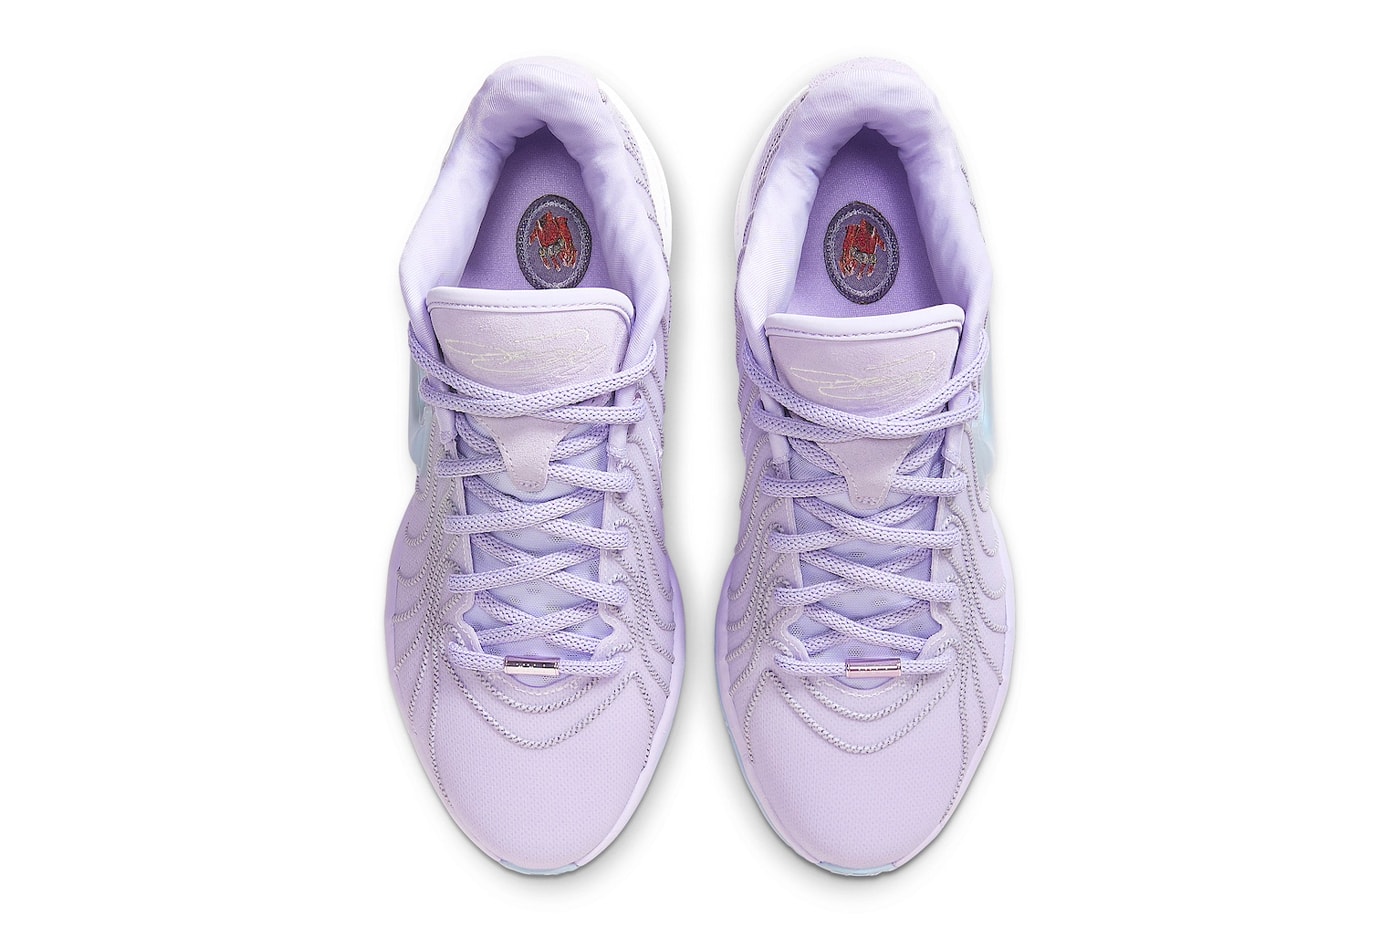 Nike LeBron 21 "Easter" HF5353-500 Release Info LeBron James Shop Online Drop Where to Buy 